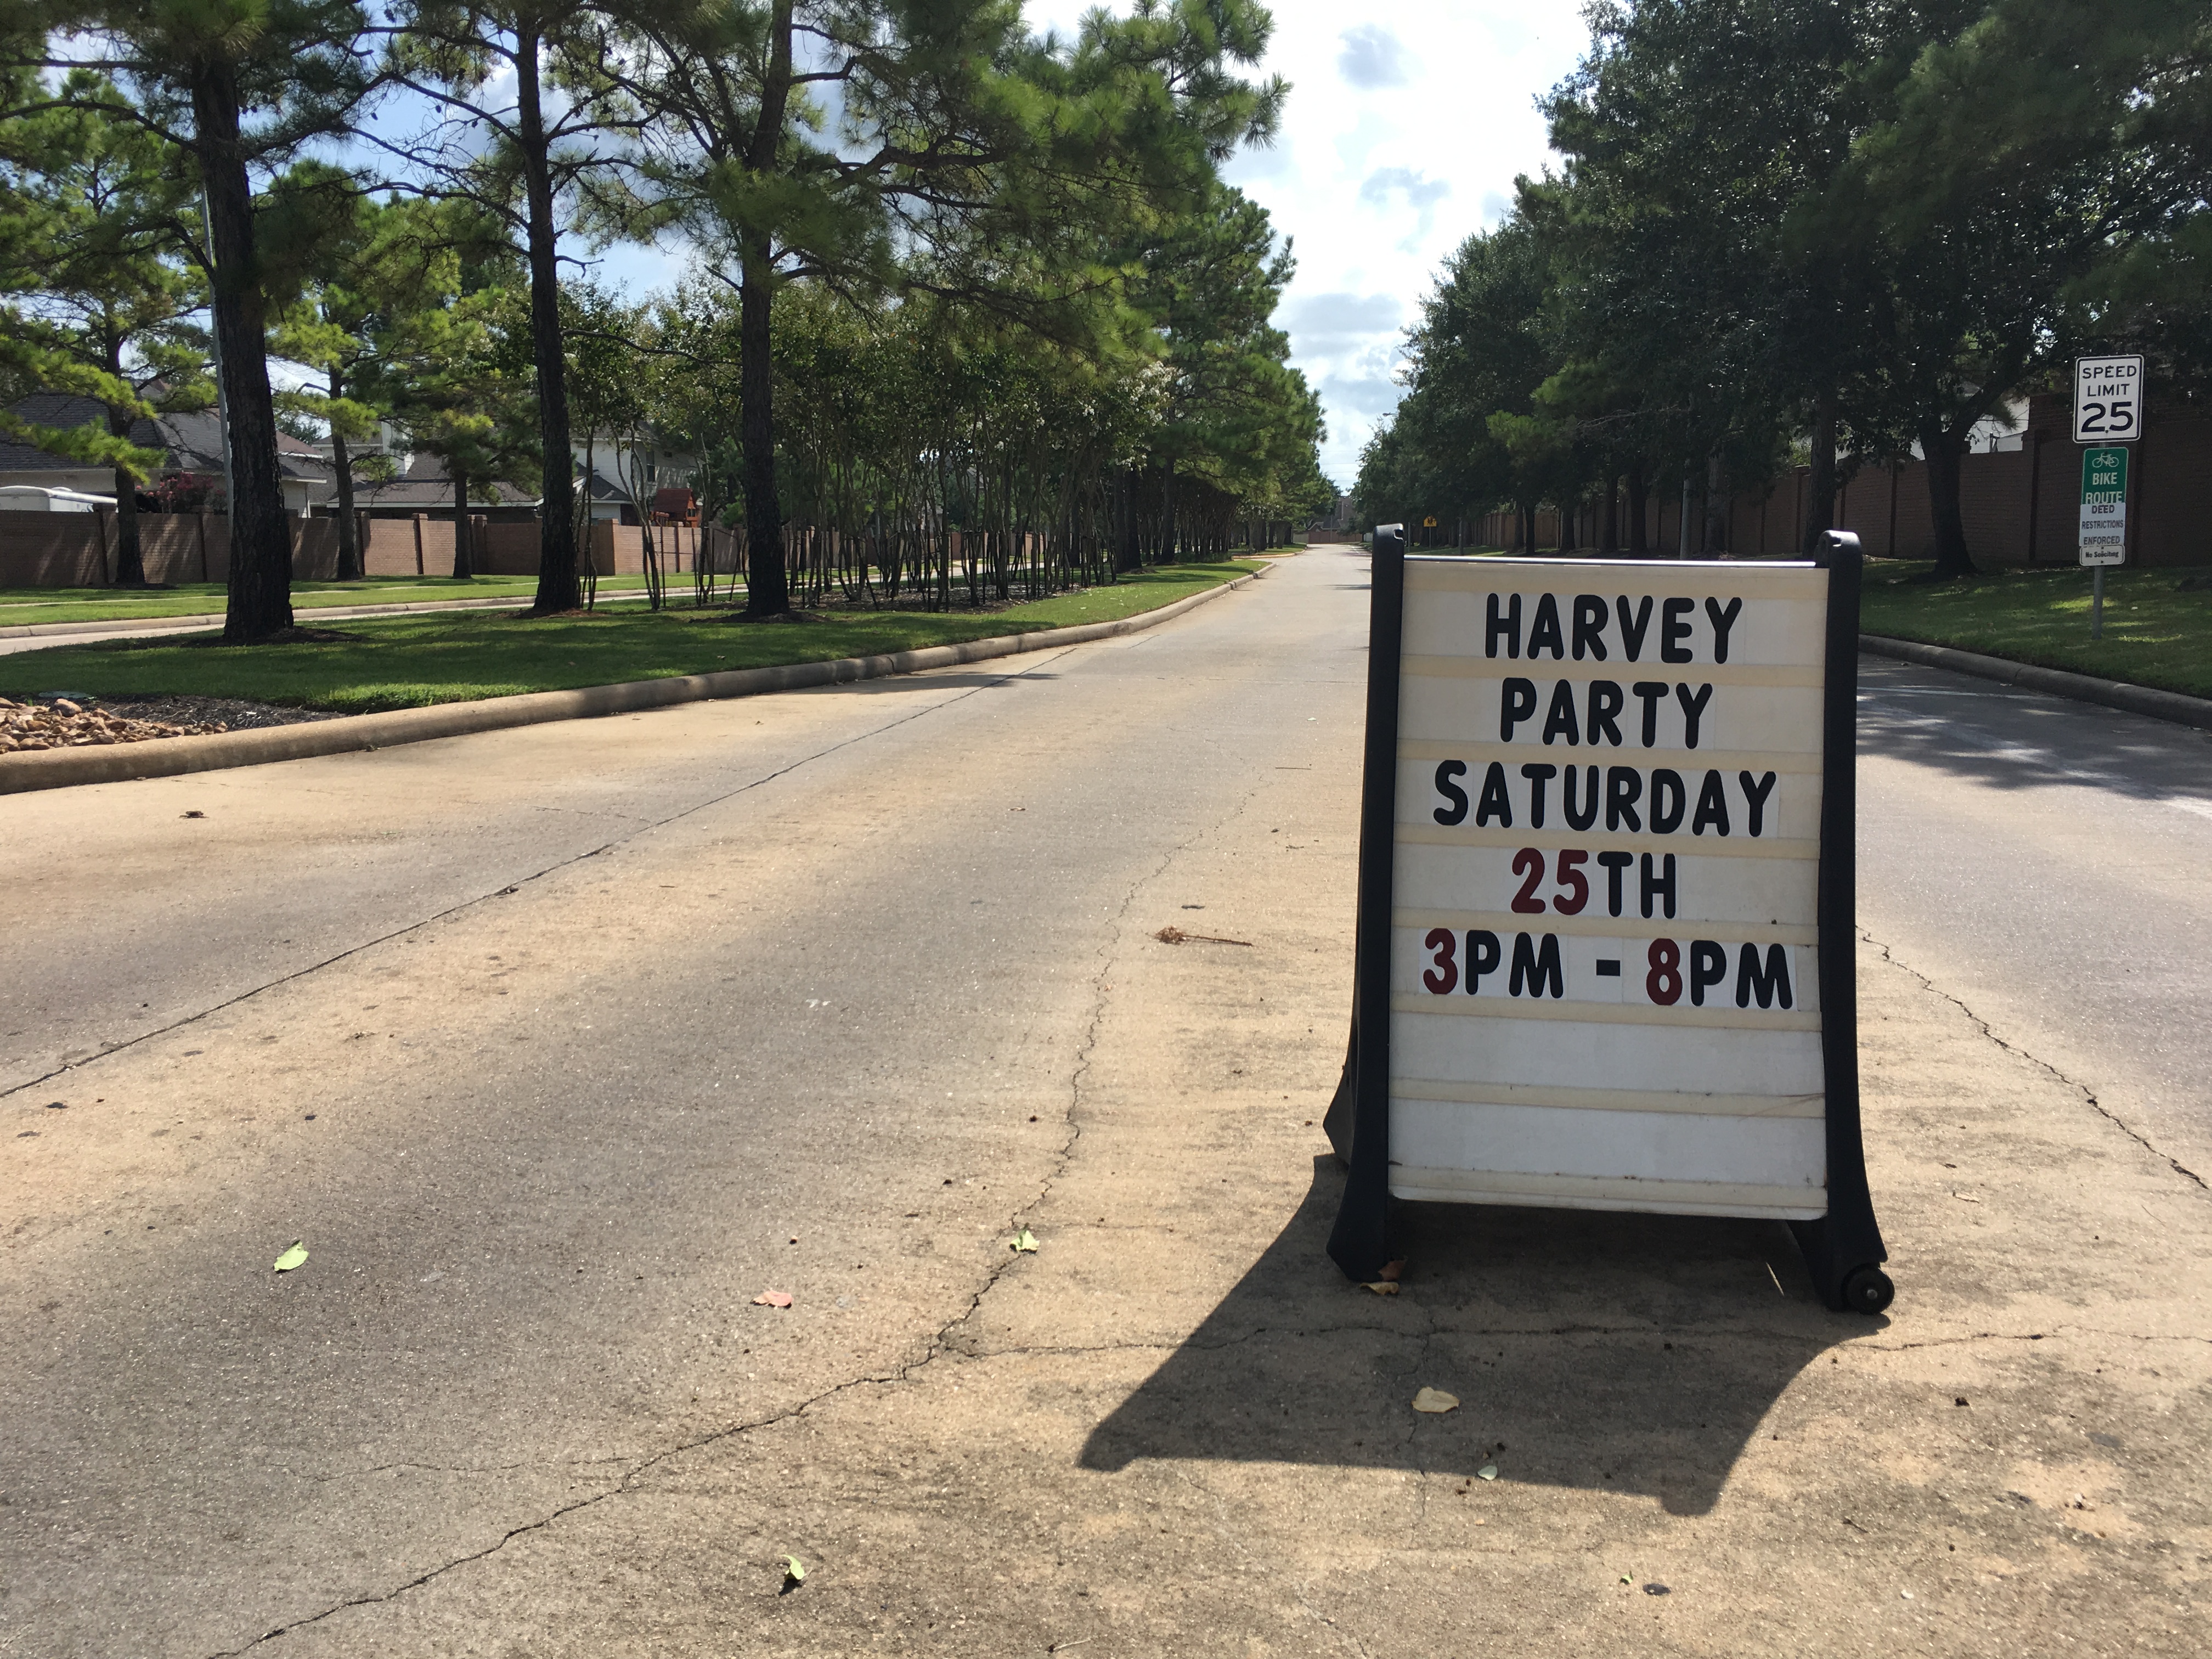 A neighborhood near the Barker Reservoir planned a party for the 1st anniversary of Hurricane Harvey hitting the Texas coast.